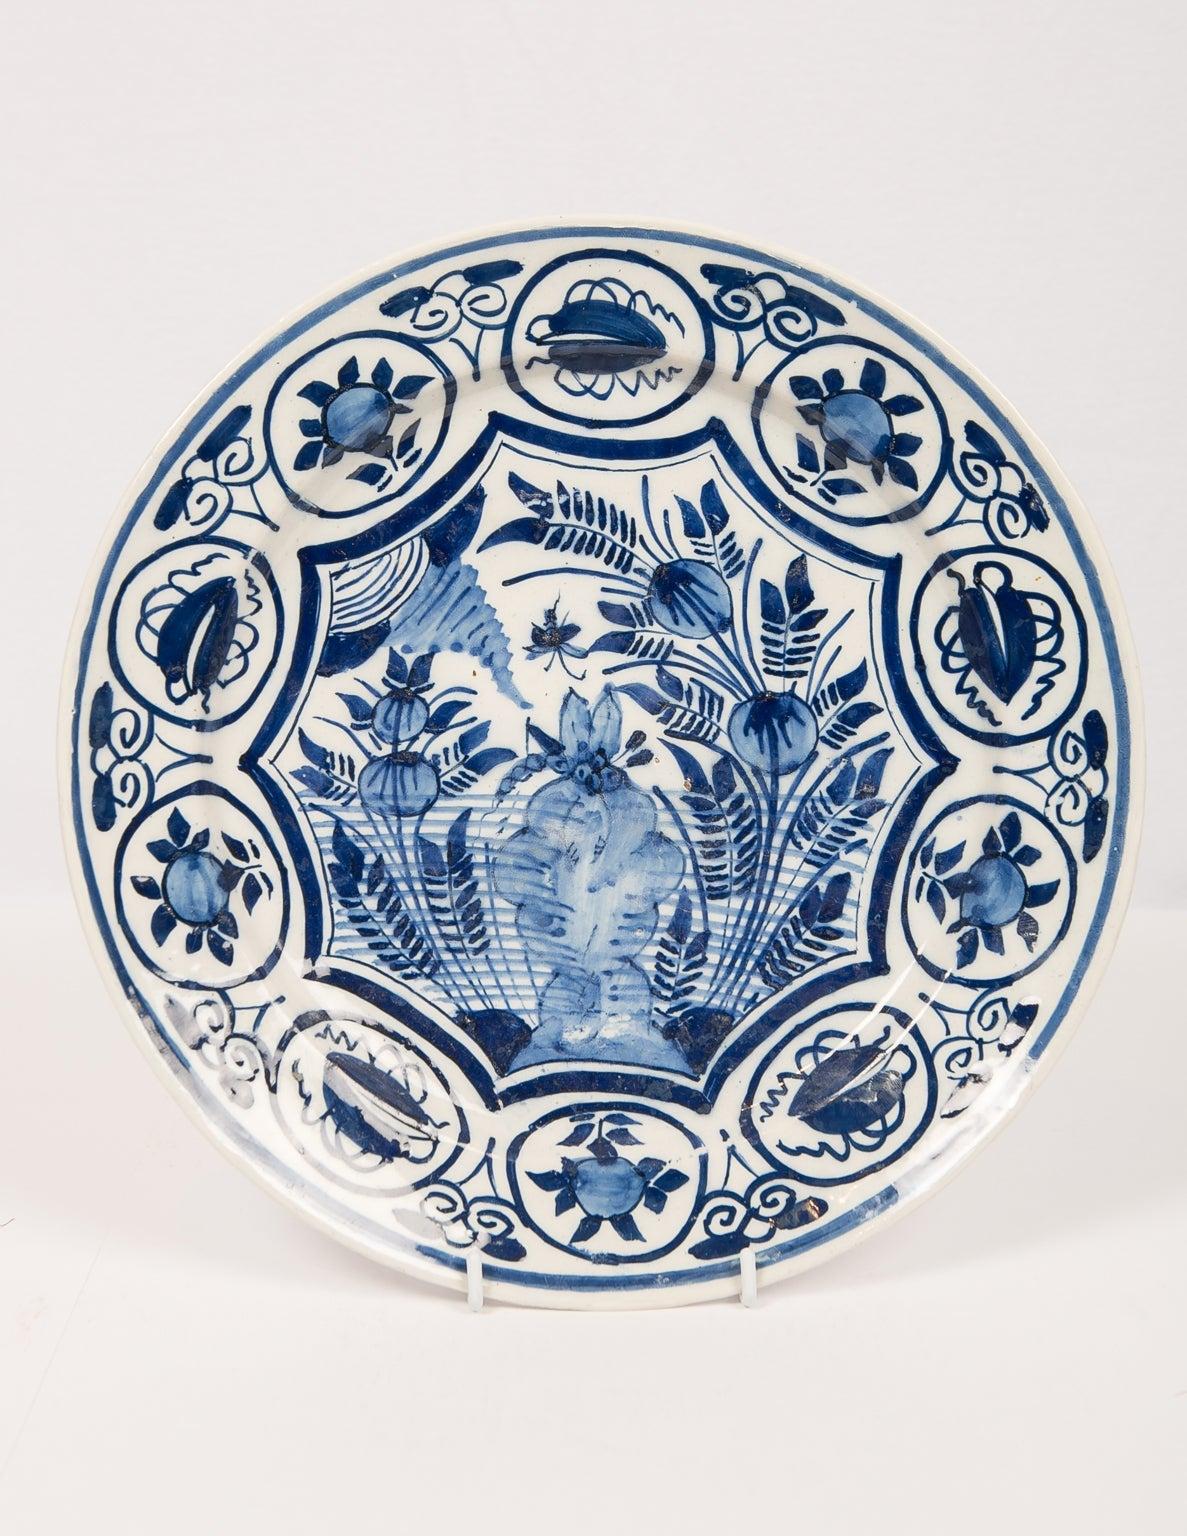 Rococo Eleven Antique Large Delft Blue and White Chargers, Late 18th Century